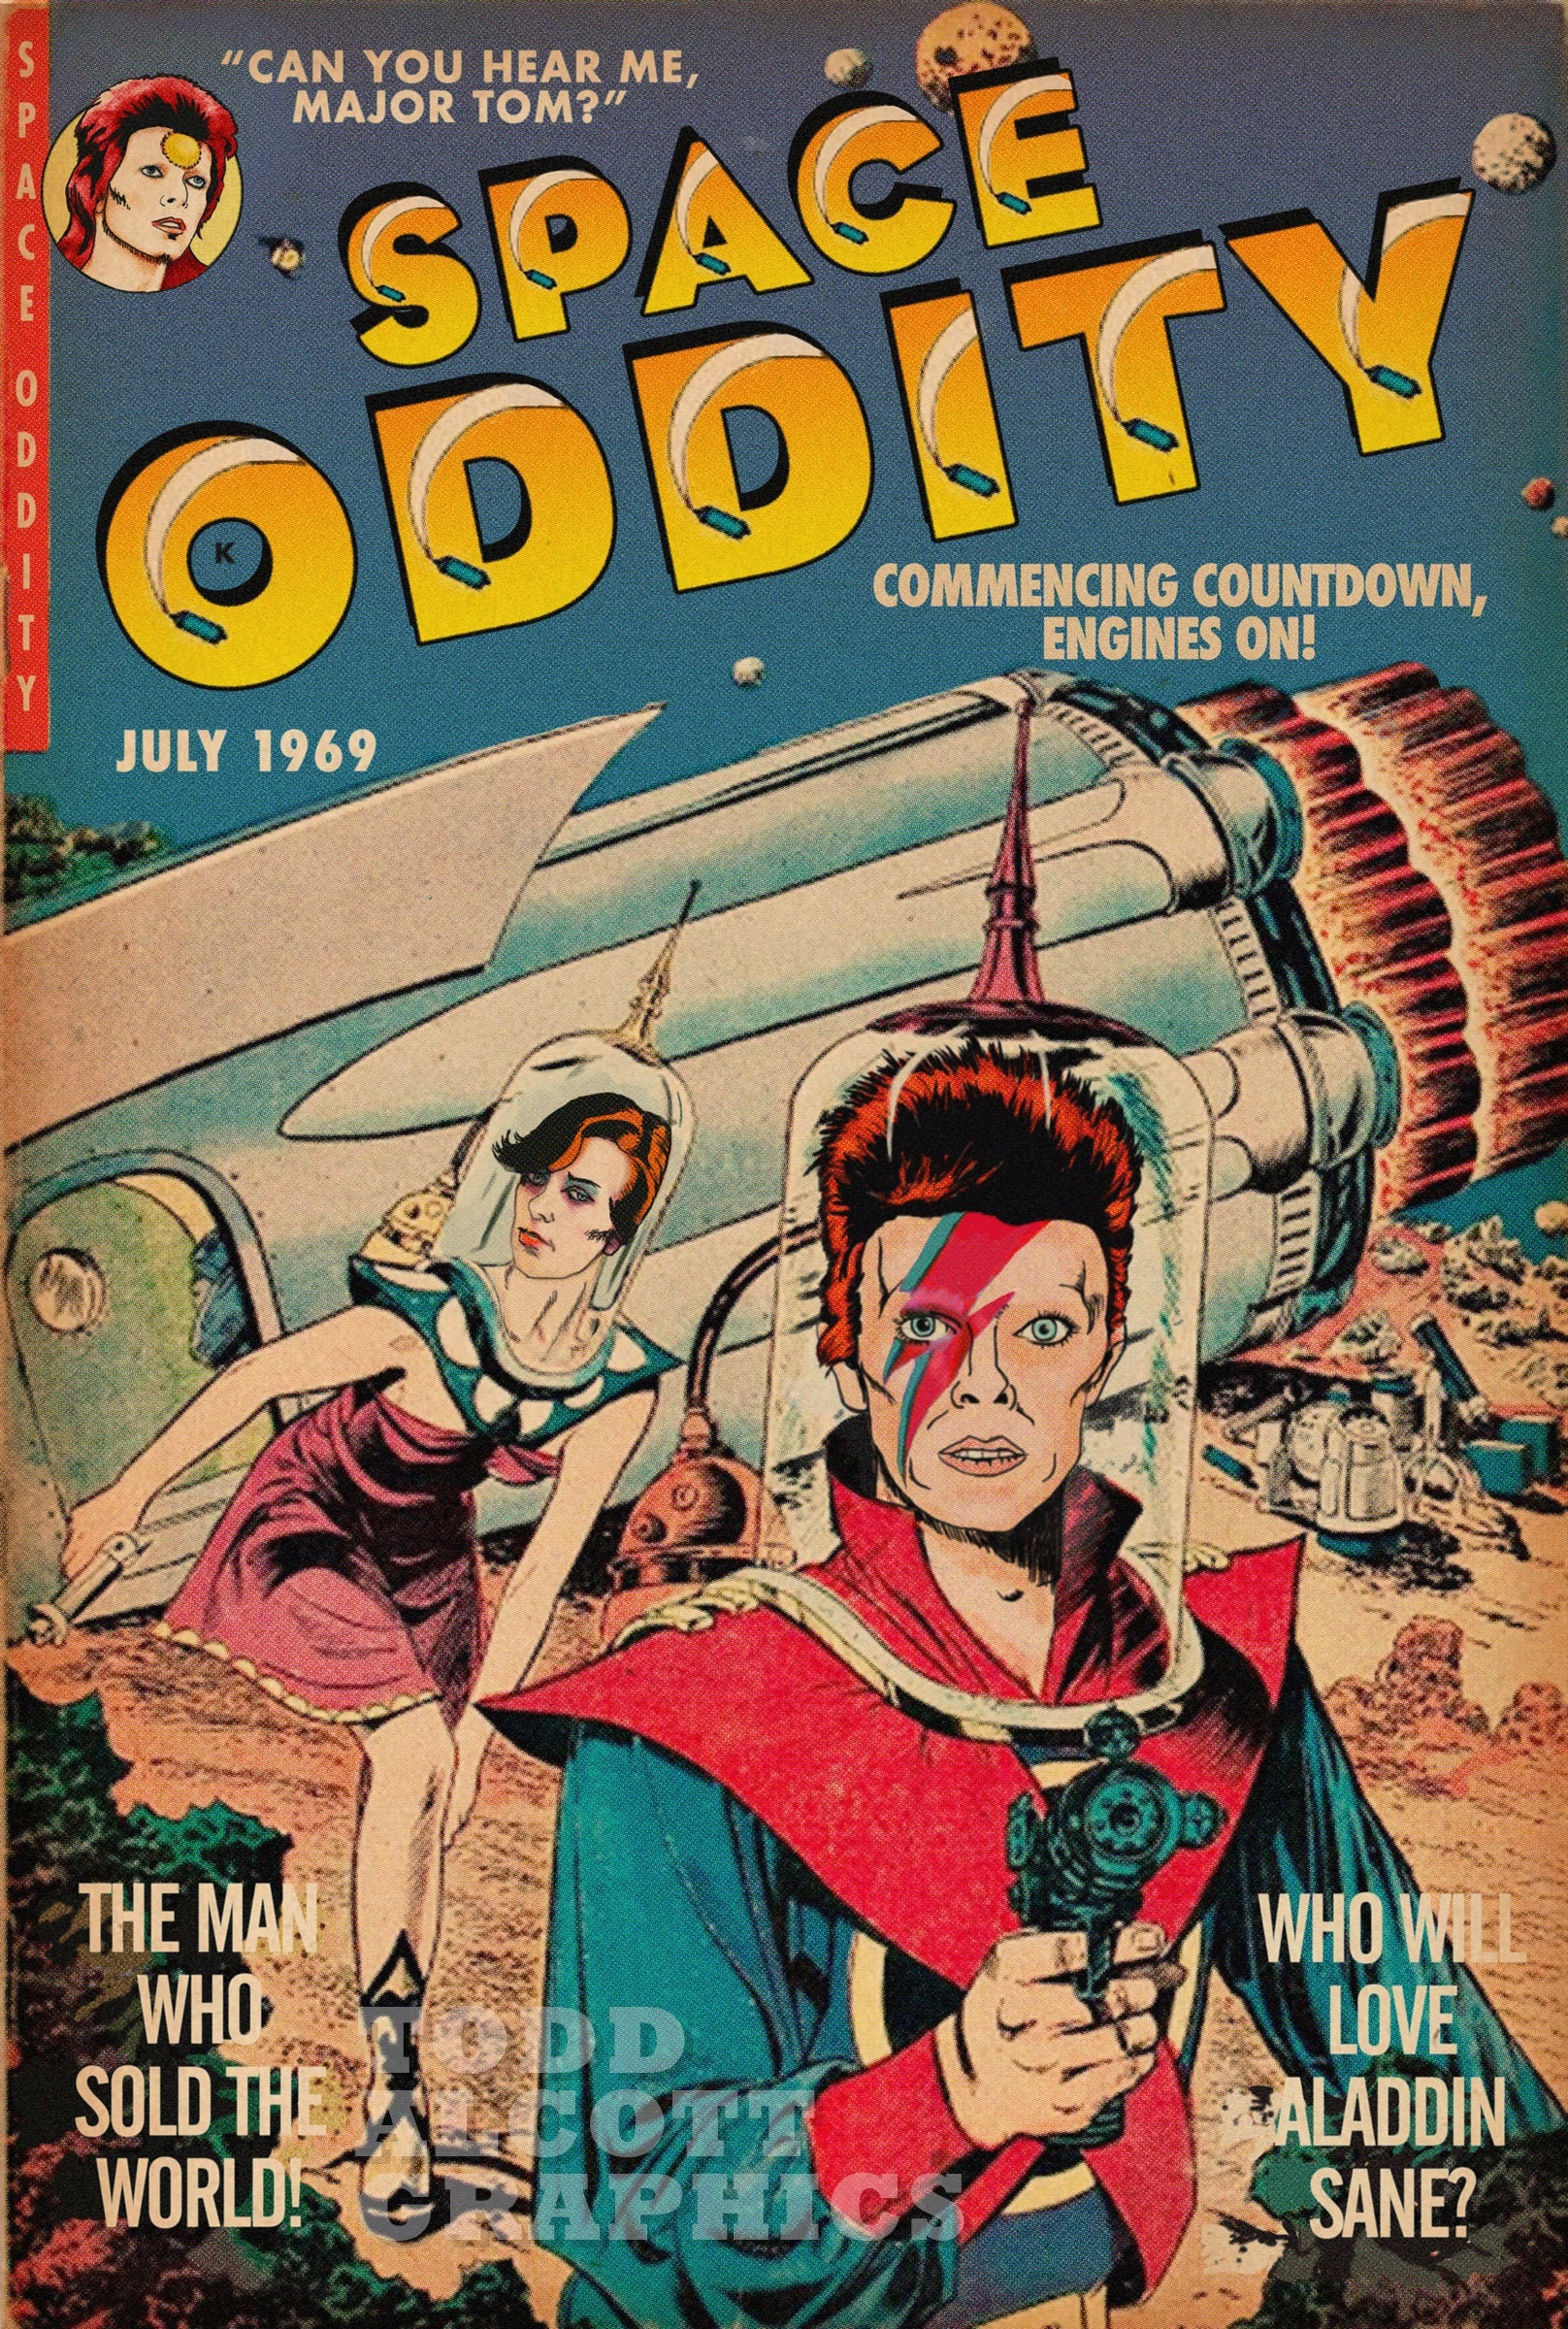 Bowie Oddity Comic Book Mashup - Etsy